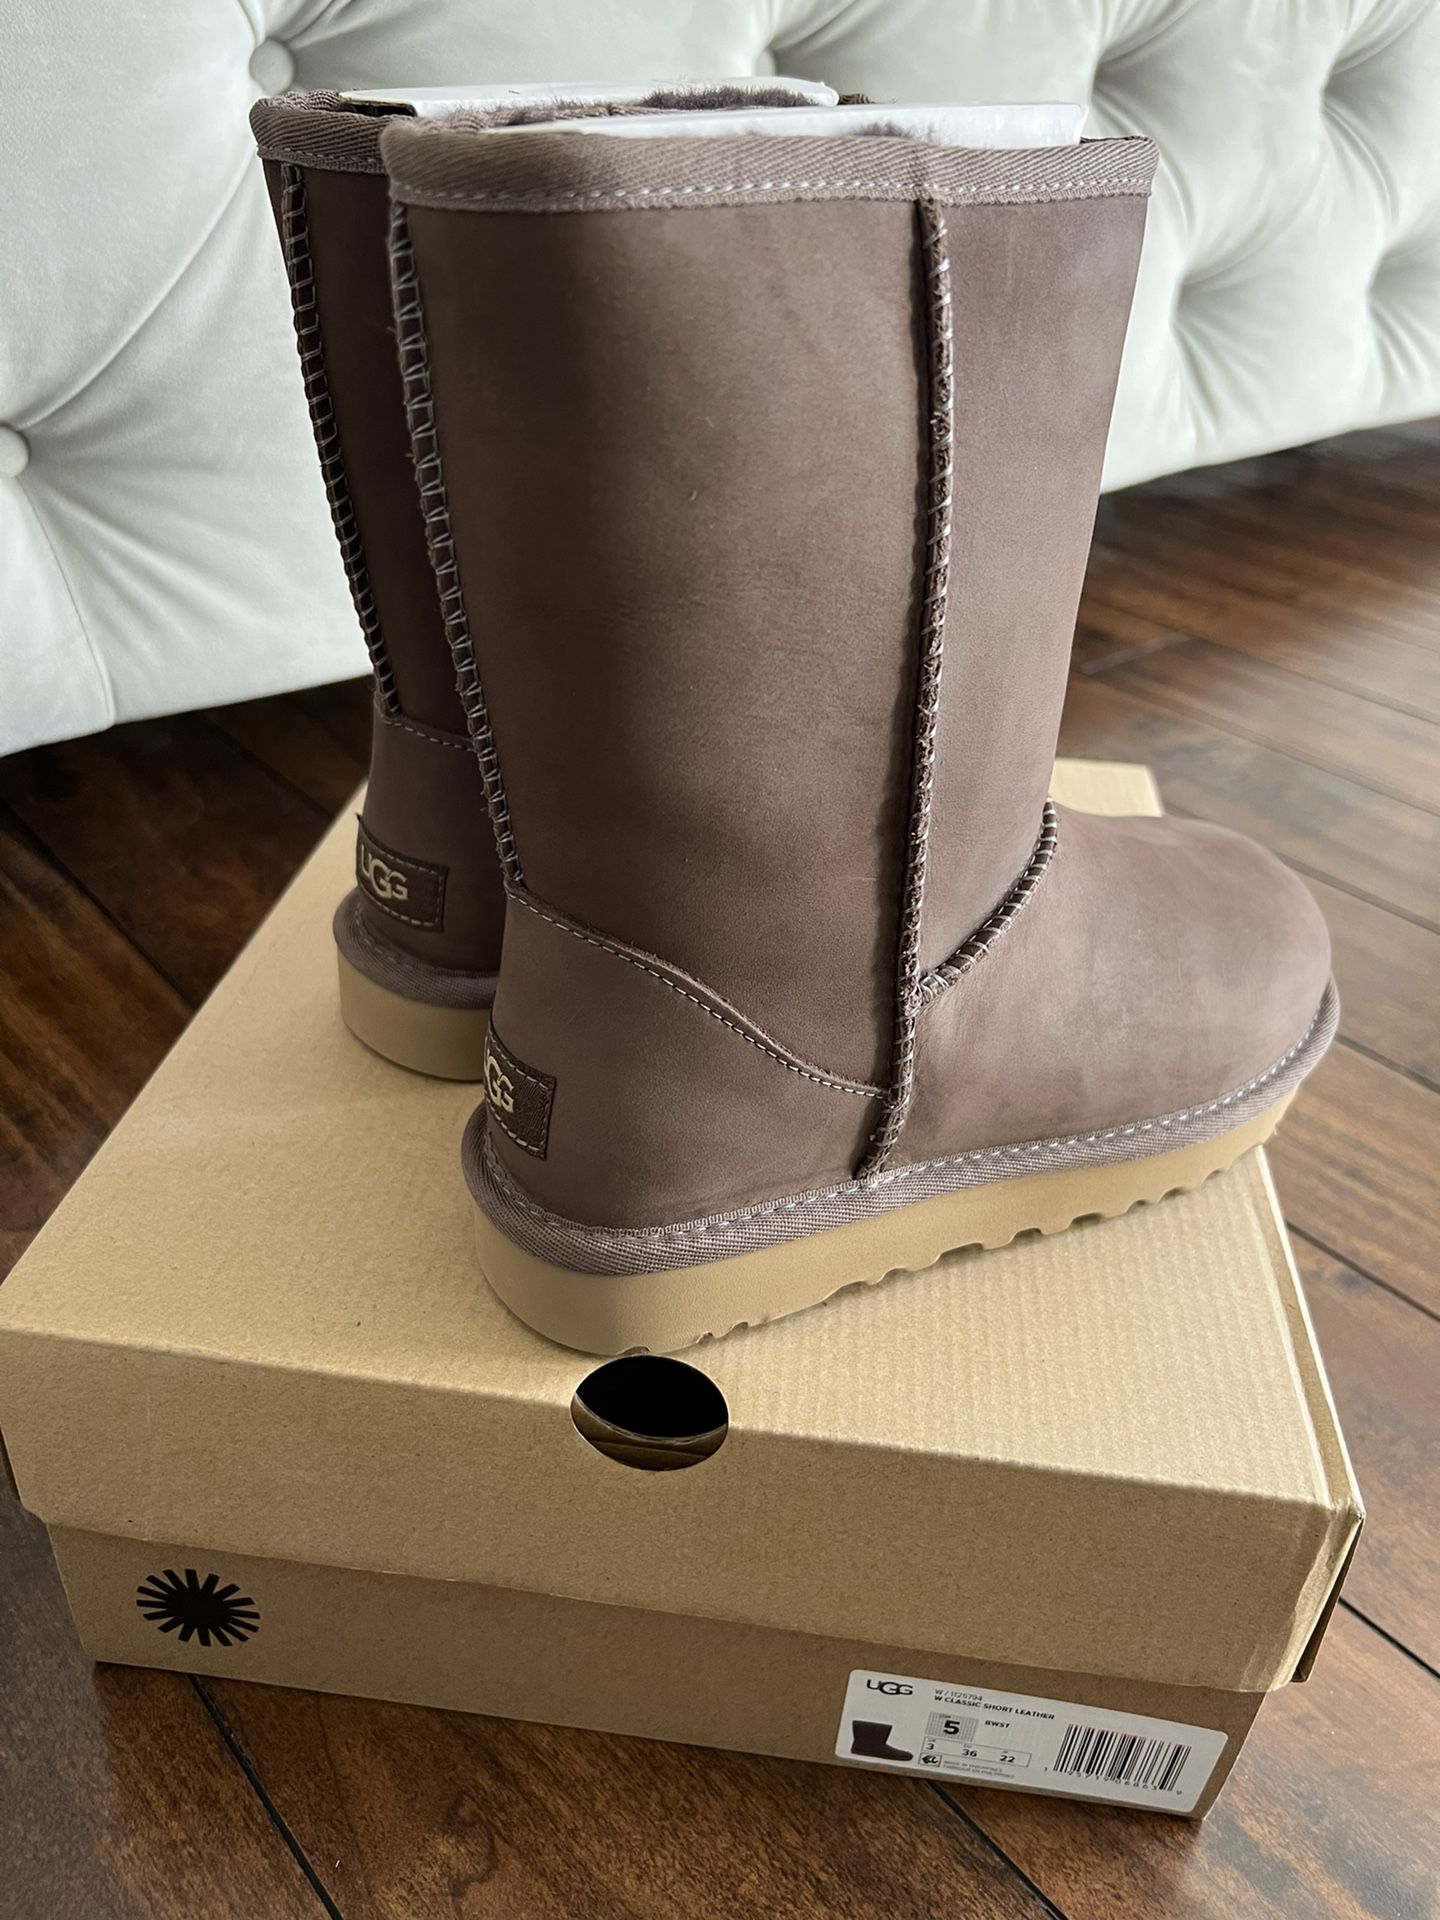 sponsor Festival Rafflesia Arnoldi ugg classic short leather waterproof boot water resistant brownstone color  brown size 5 womens for Sale in Rancho Cordova, CA - OfferUp